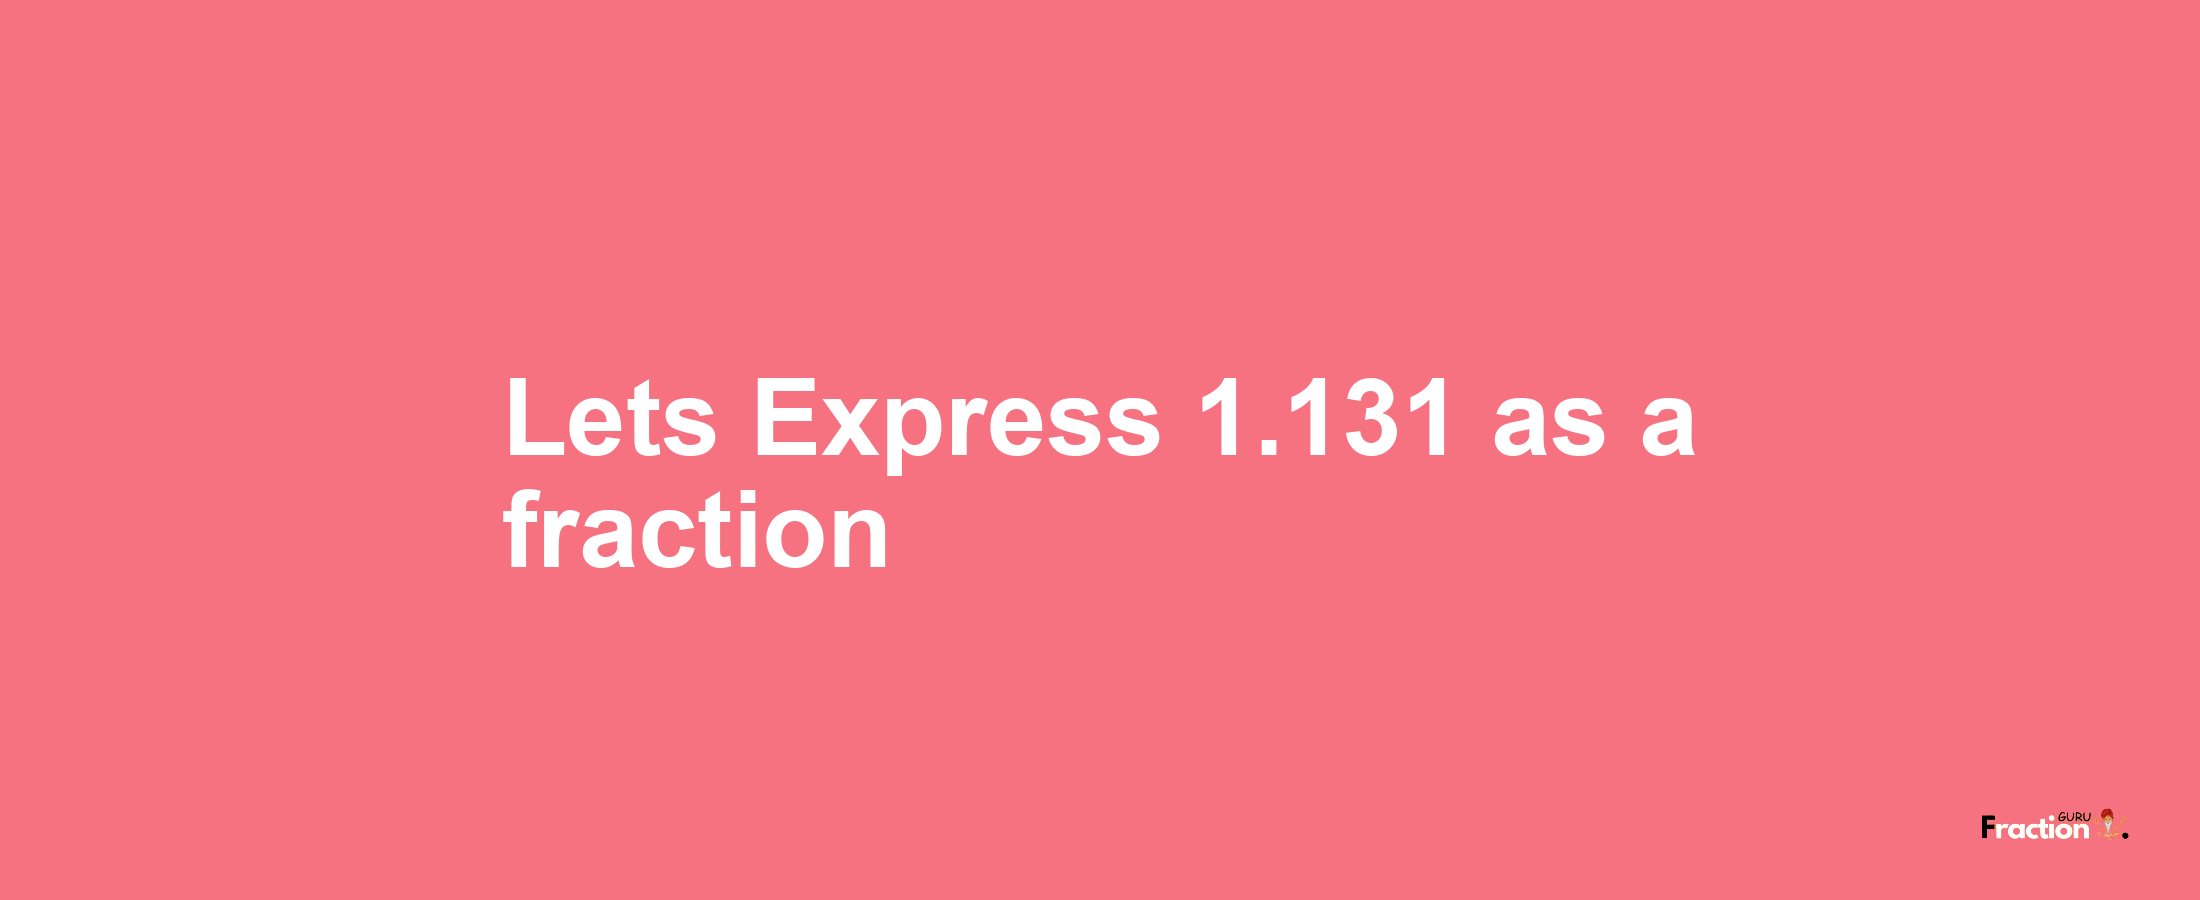 Lets Express 1.131 as afraction